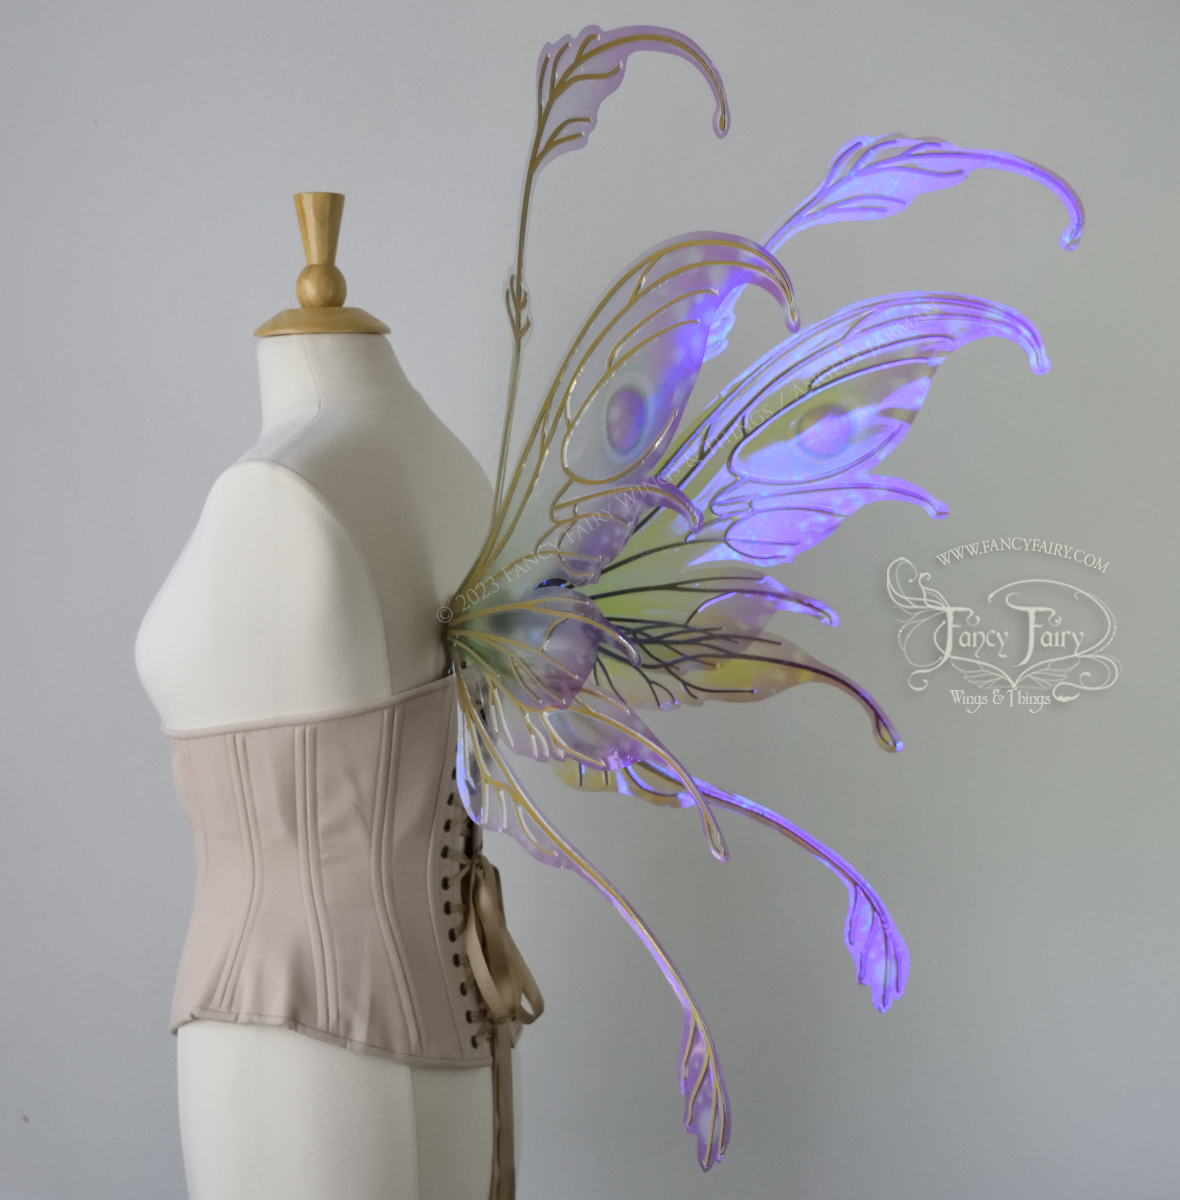 3/4 back view of a dress form wearing an underbust corset & 'Fauna' transparent pink, violet & green iridescent fairy wings with downward curved tips, antennae & wispy 'tails', with gold veining